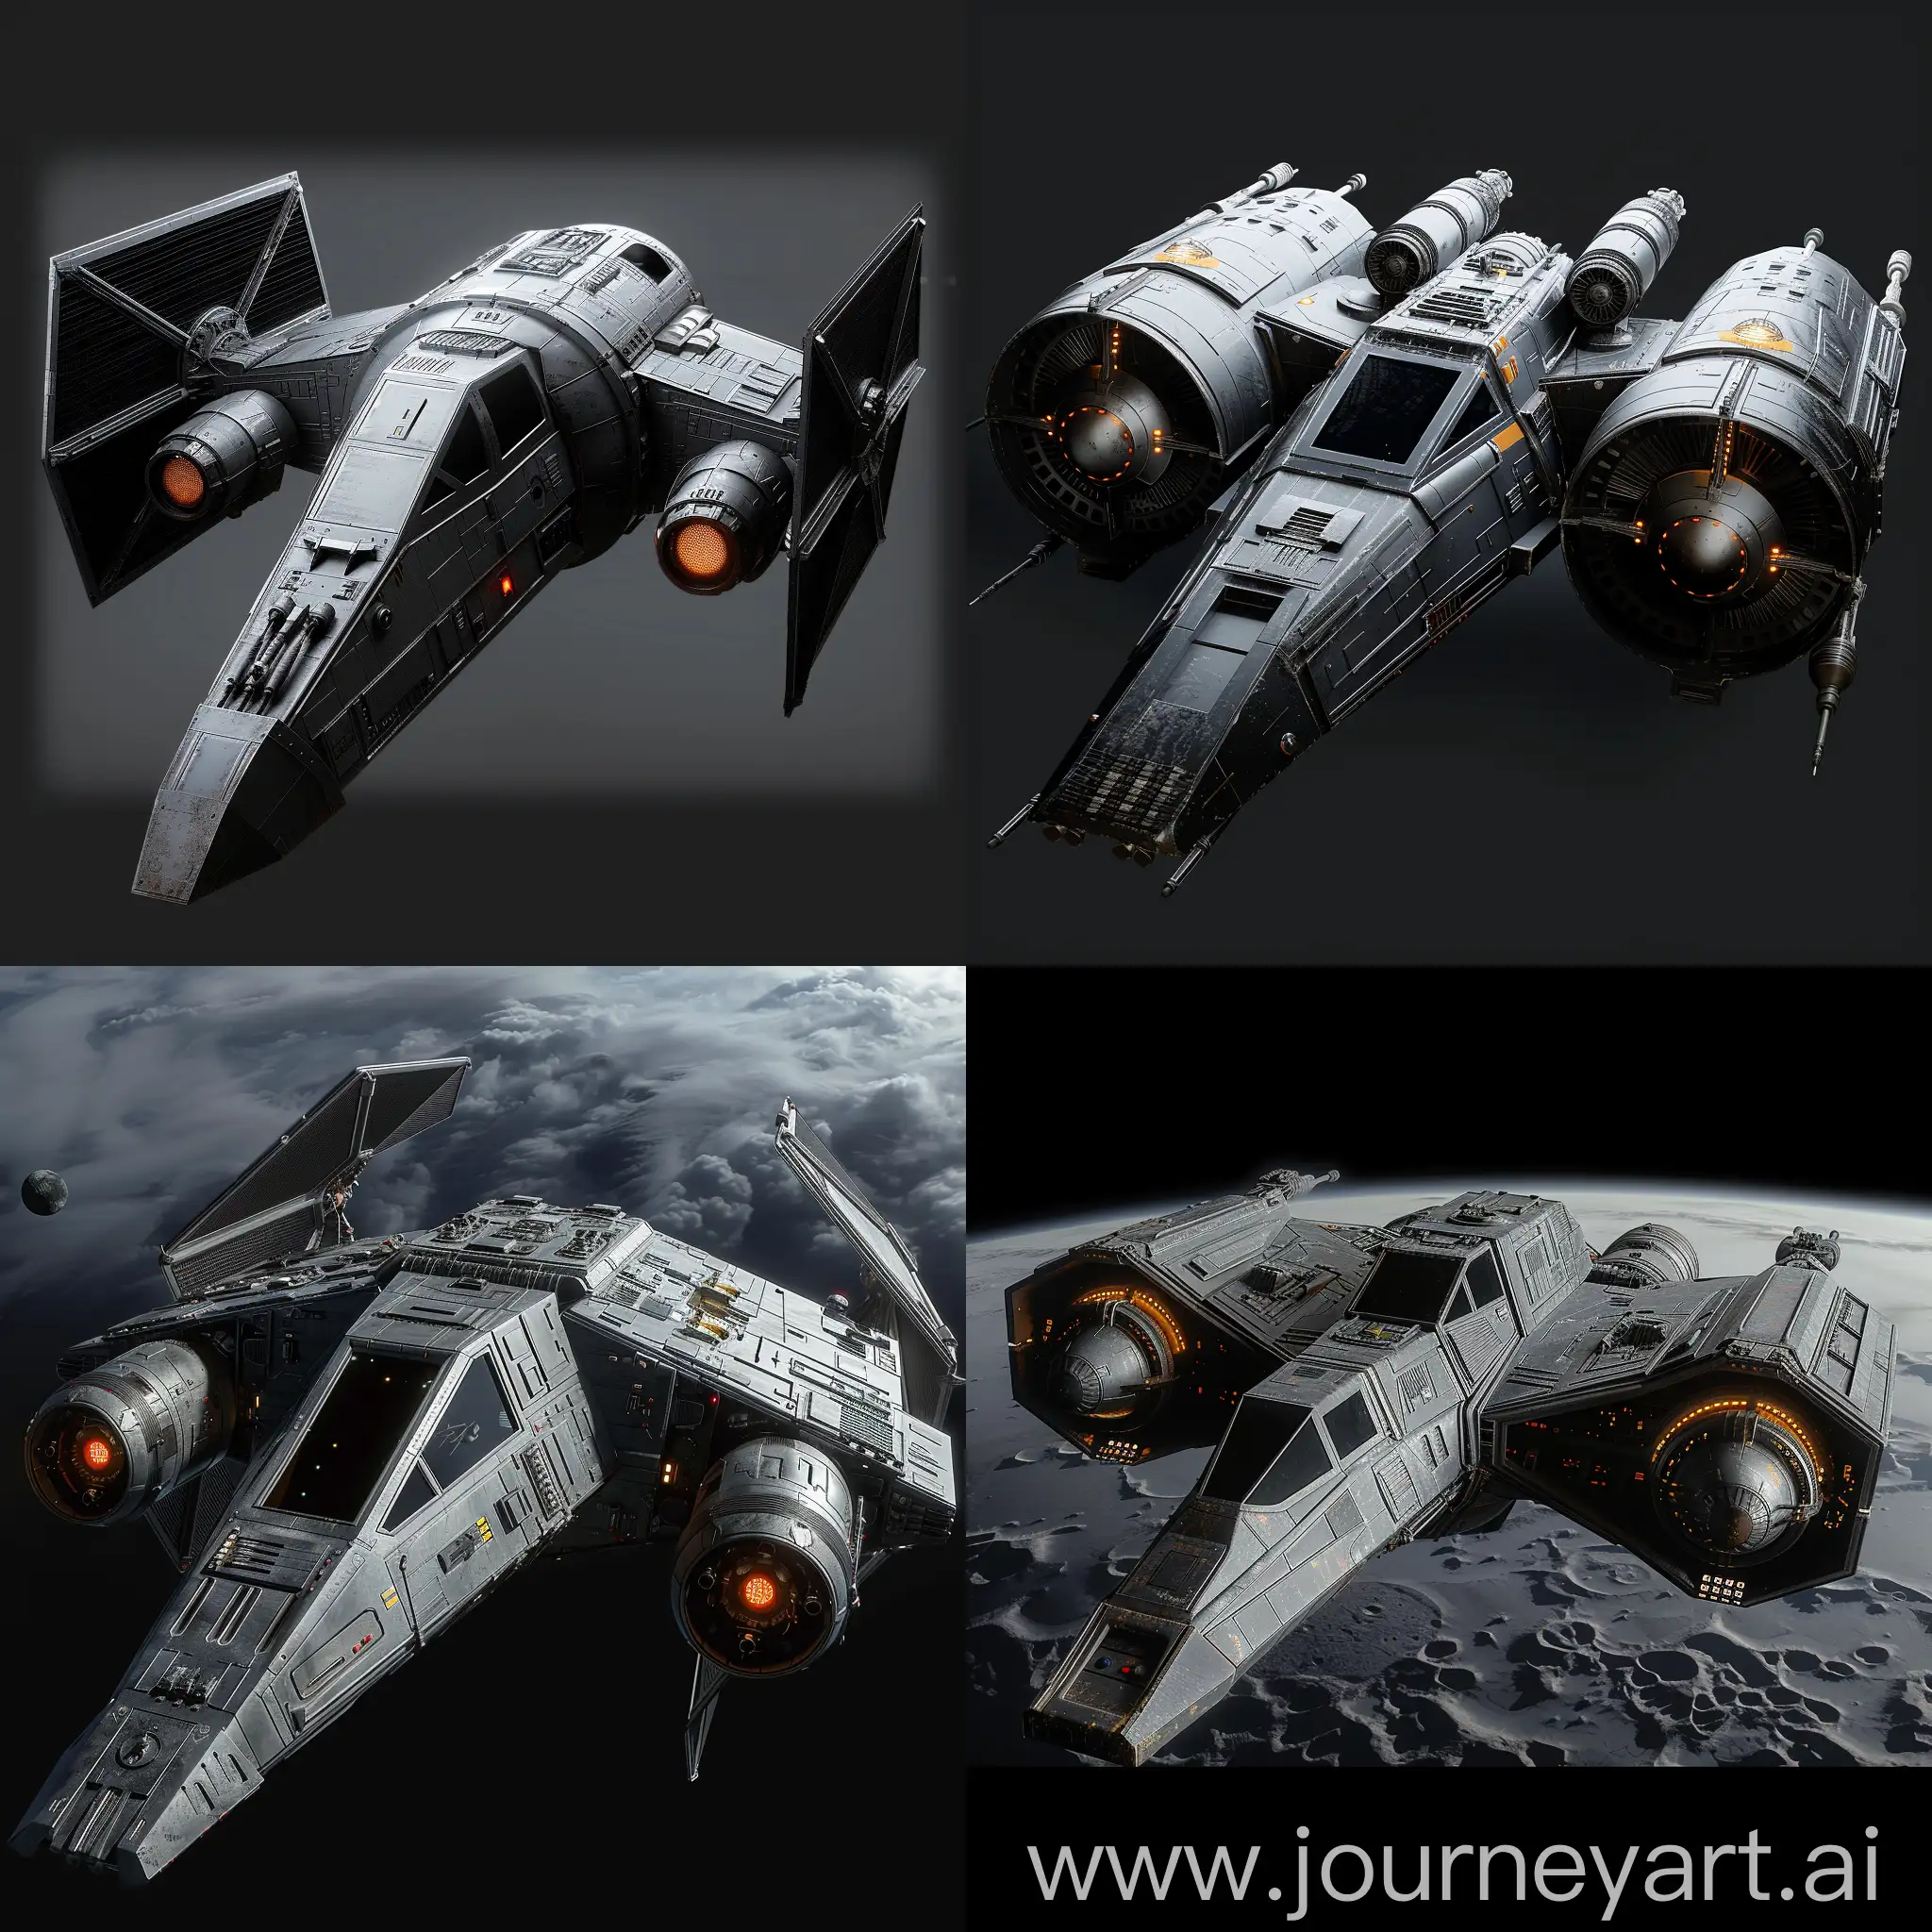 Futuristic Star Wars Tie Bomber https://static.wikia.nocookie.net/starwars/images/1/17/TIE_Bomber_BF2.png/revision/latest/scale-to-width-down/1200?cb=20230720014331, Solar panels, Regenerative braking system, Energy-efficient propulsion system, Lightweight materials, Energy management system, Energy storage system, Energy-efficient lighting, Smart sensors, Energy recovery systems, Aerodynamic design, Holographic cockpit displays, AI-assisted flight control, Stealth technology, Advanced targeting systems, Adaptive camouflage, Drone swarm deployment system, Energy shields, Quantum communication system, Self-repairing nanotechnology, Hyperdrive capability, Self-healing hull, Nanoscale sensors, Nanobot maintenance crew, Nanoscale camouflage, Nanomedicine storage, Nanoscale weapons, Nanocomposite armor, Nanoparticle propulsion, Nanoscale communication network, Nanotech energy storage, Biological energy generation, Bio-inspired aerodynamics, Bioluminescent displays, Bio-synthetic materials, Bio-mimicking camouflage, Biomedical monitoring systems, Bio-inspired weaponry, Genetic encryption, Bio-organic repair systems, Bio-hybrid AI interface, octane render --stylize 1000